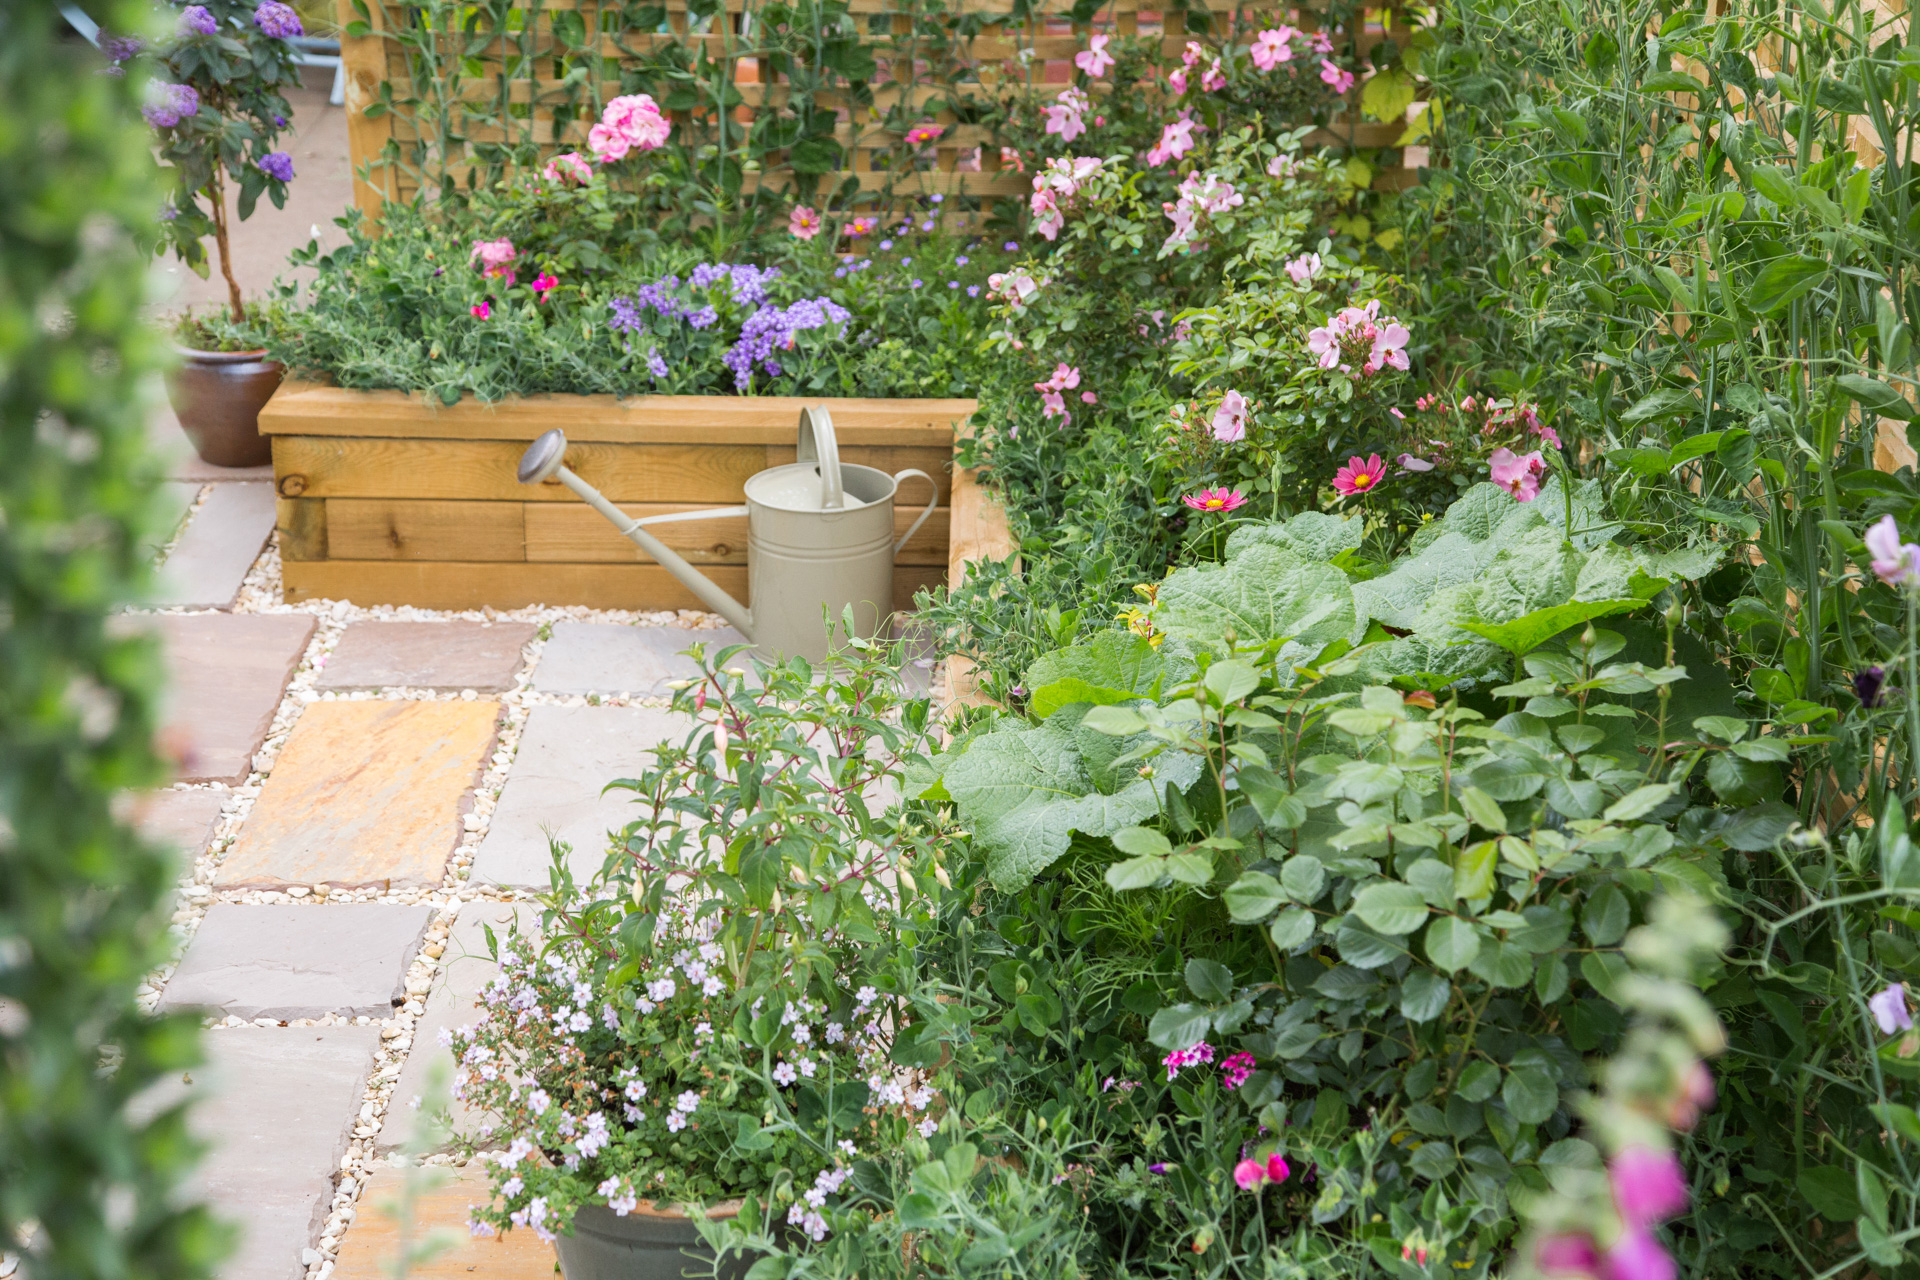 plan your dream garden with the help of woodblocx. - woodblocx